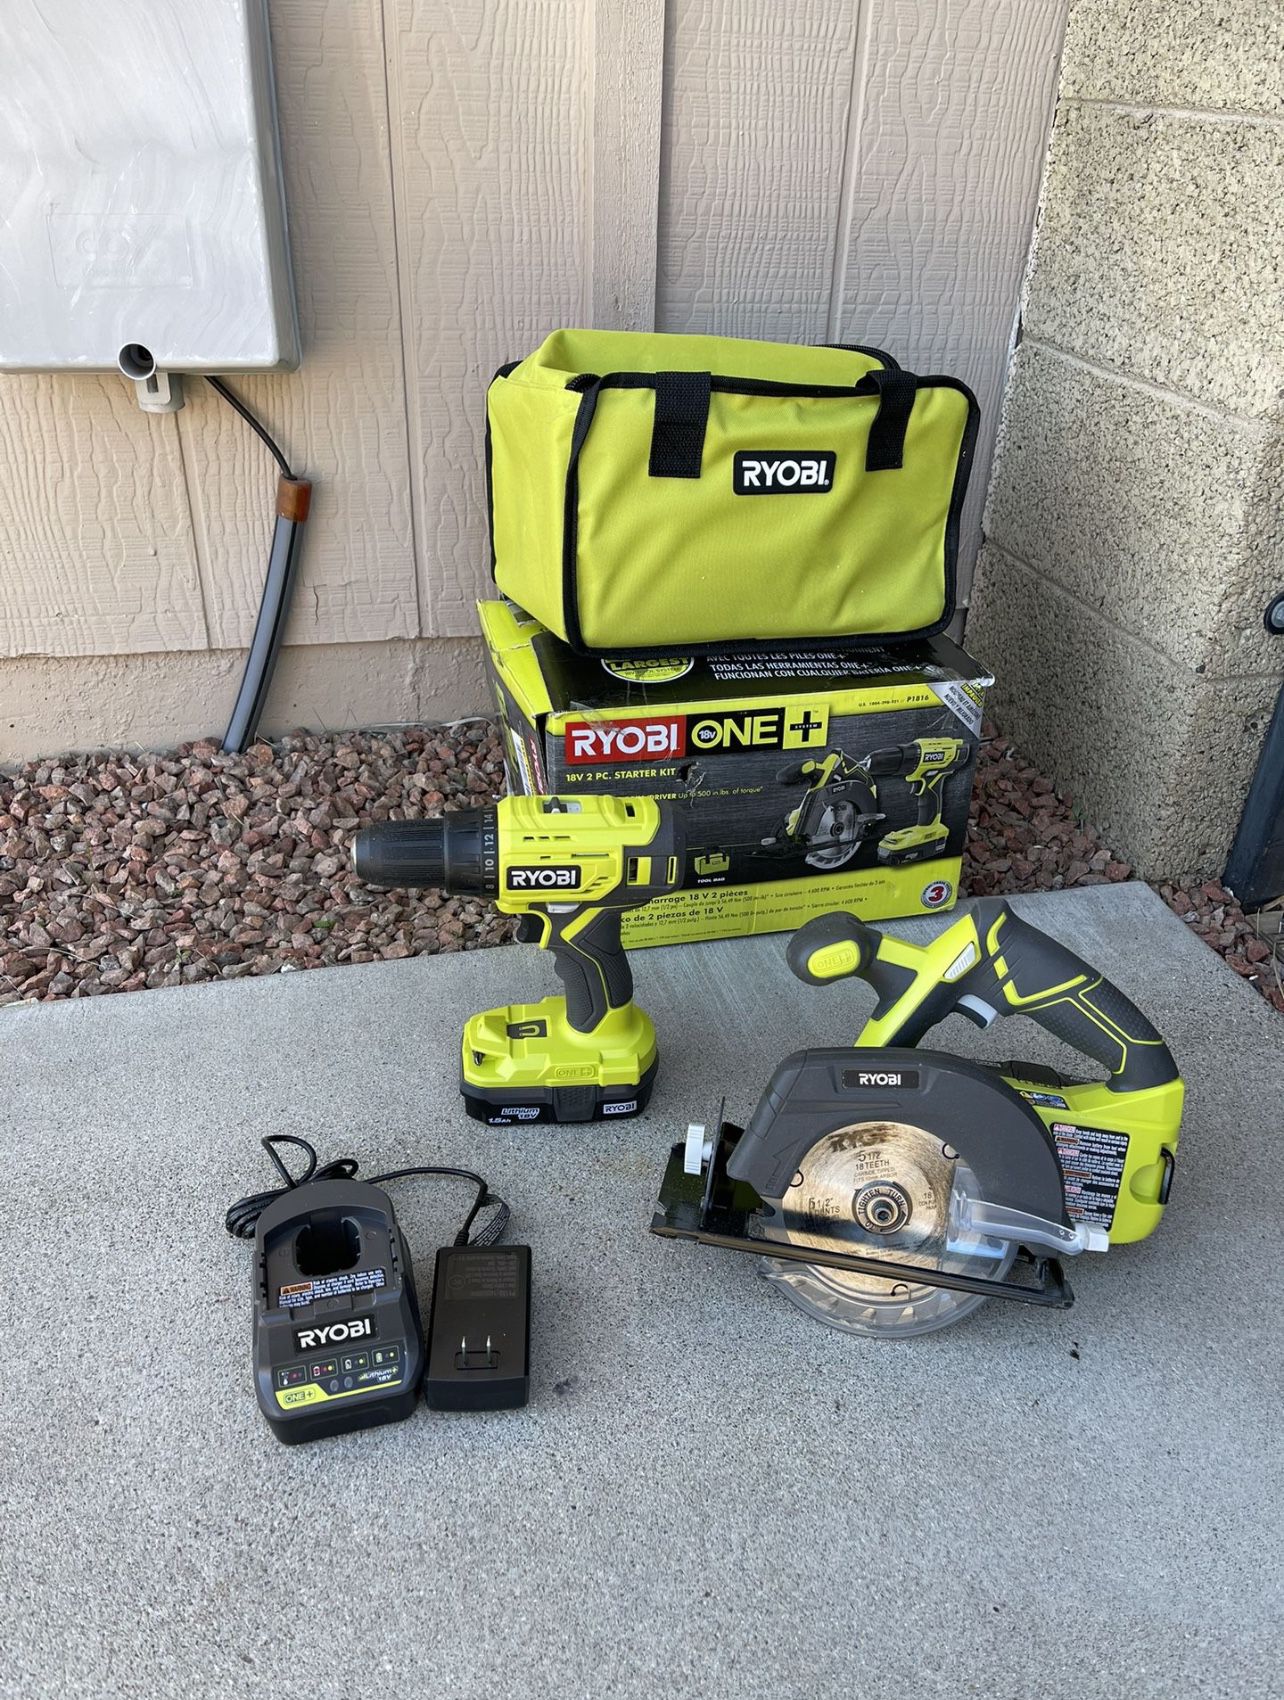 Ryobi 18v Drill And Saw With Battery And Charger 